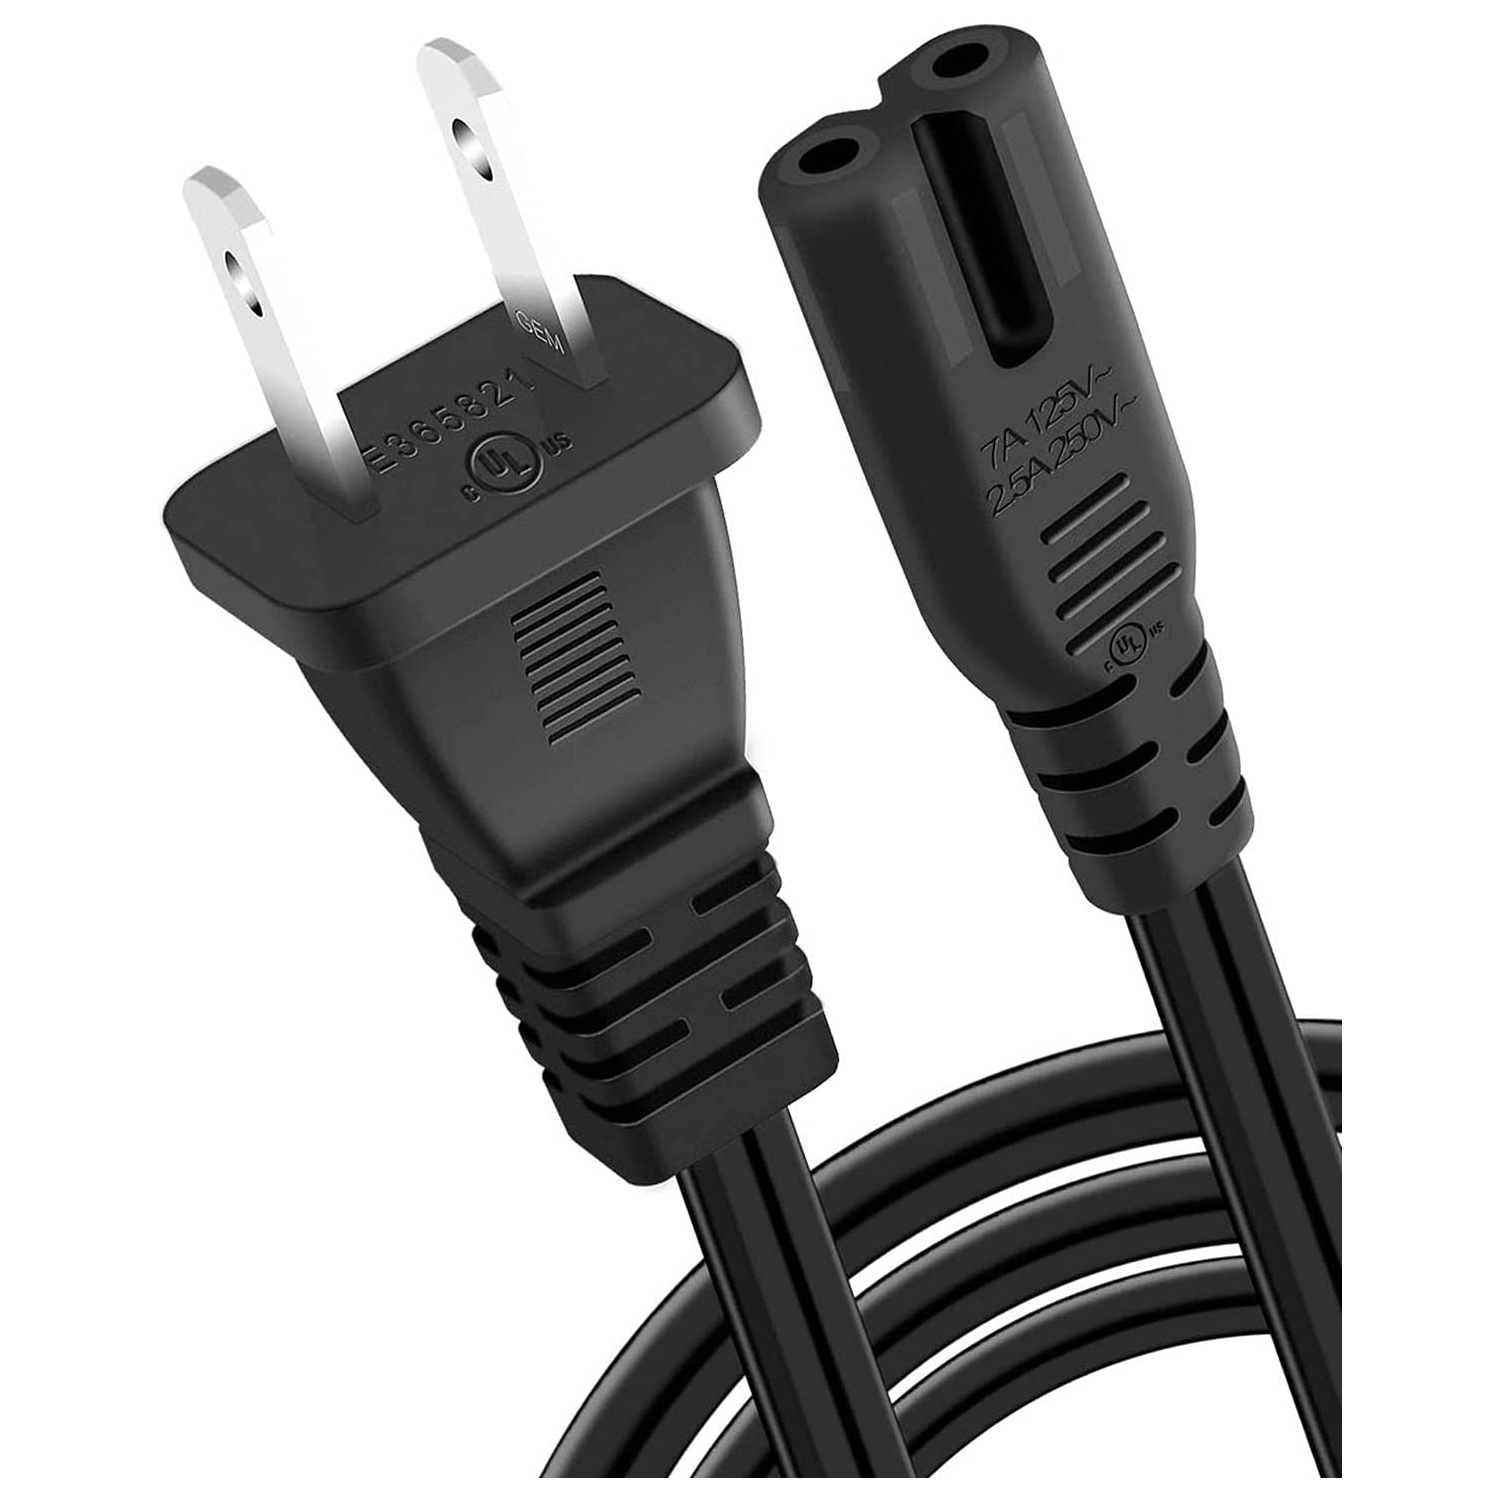 [UL Listed] 12Ft Long AC Power Cord for PS5 PS4 PS3,Xbox One S/X,Samsung TCL Roku Apple Toshiba Insignia LED LCD Smart